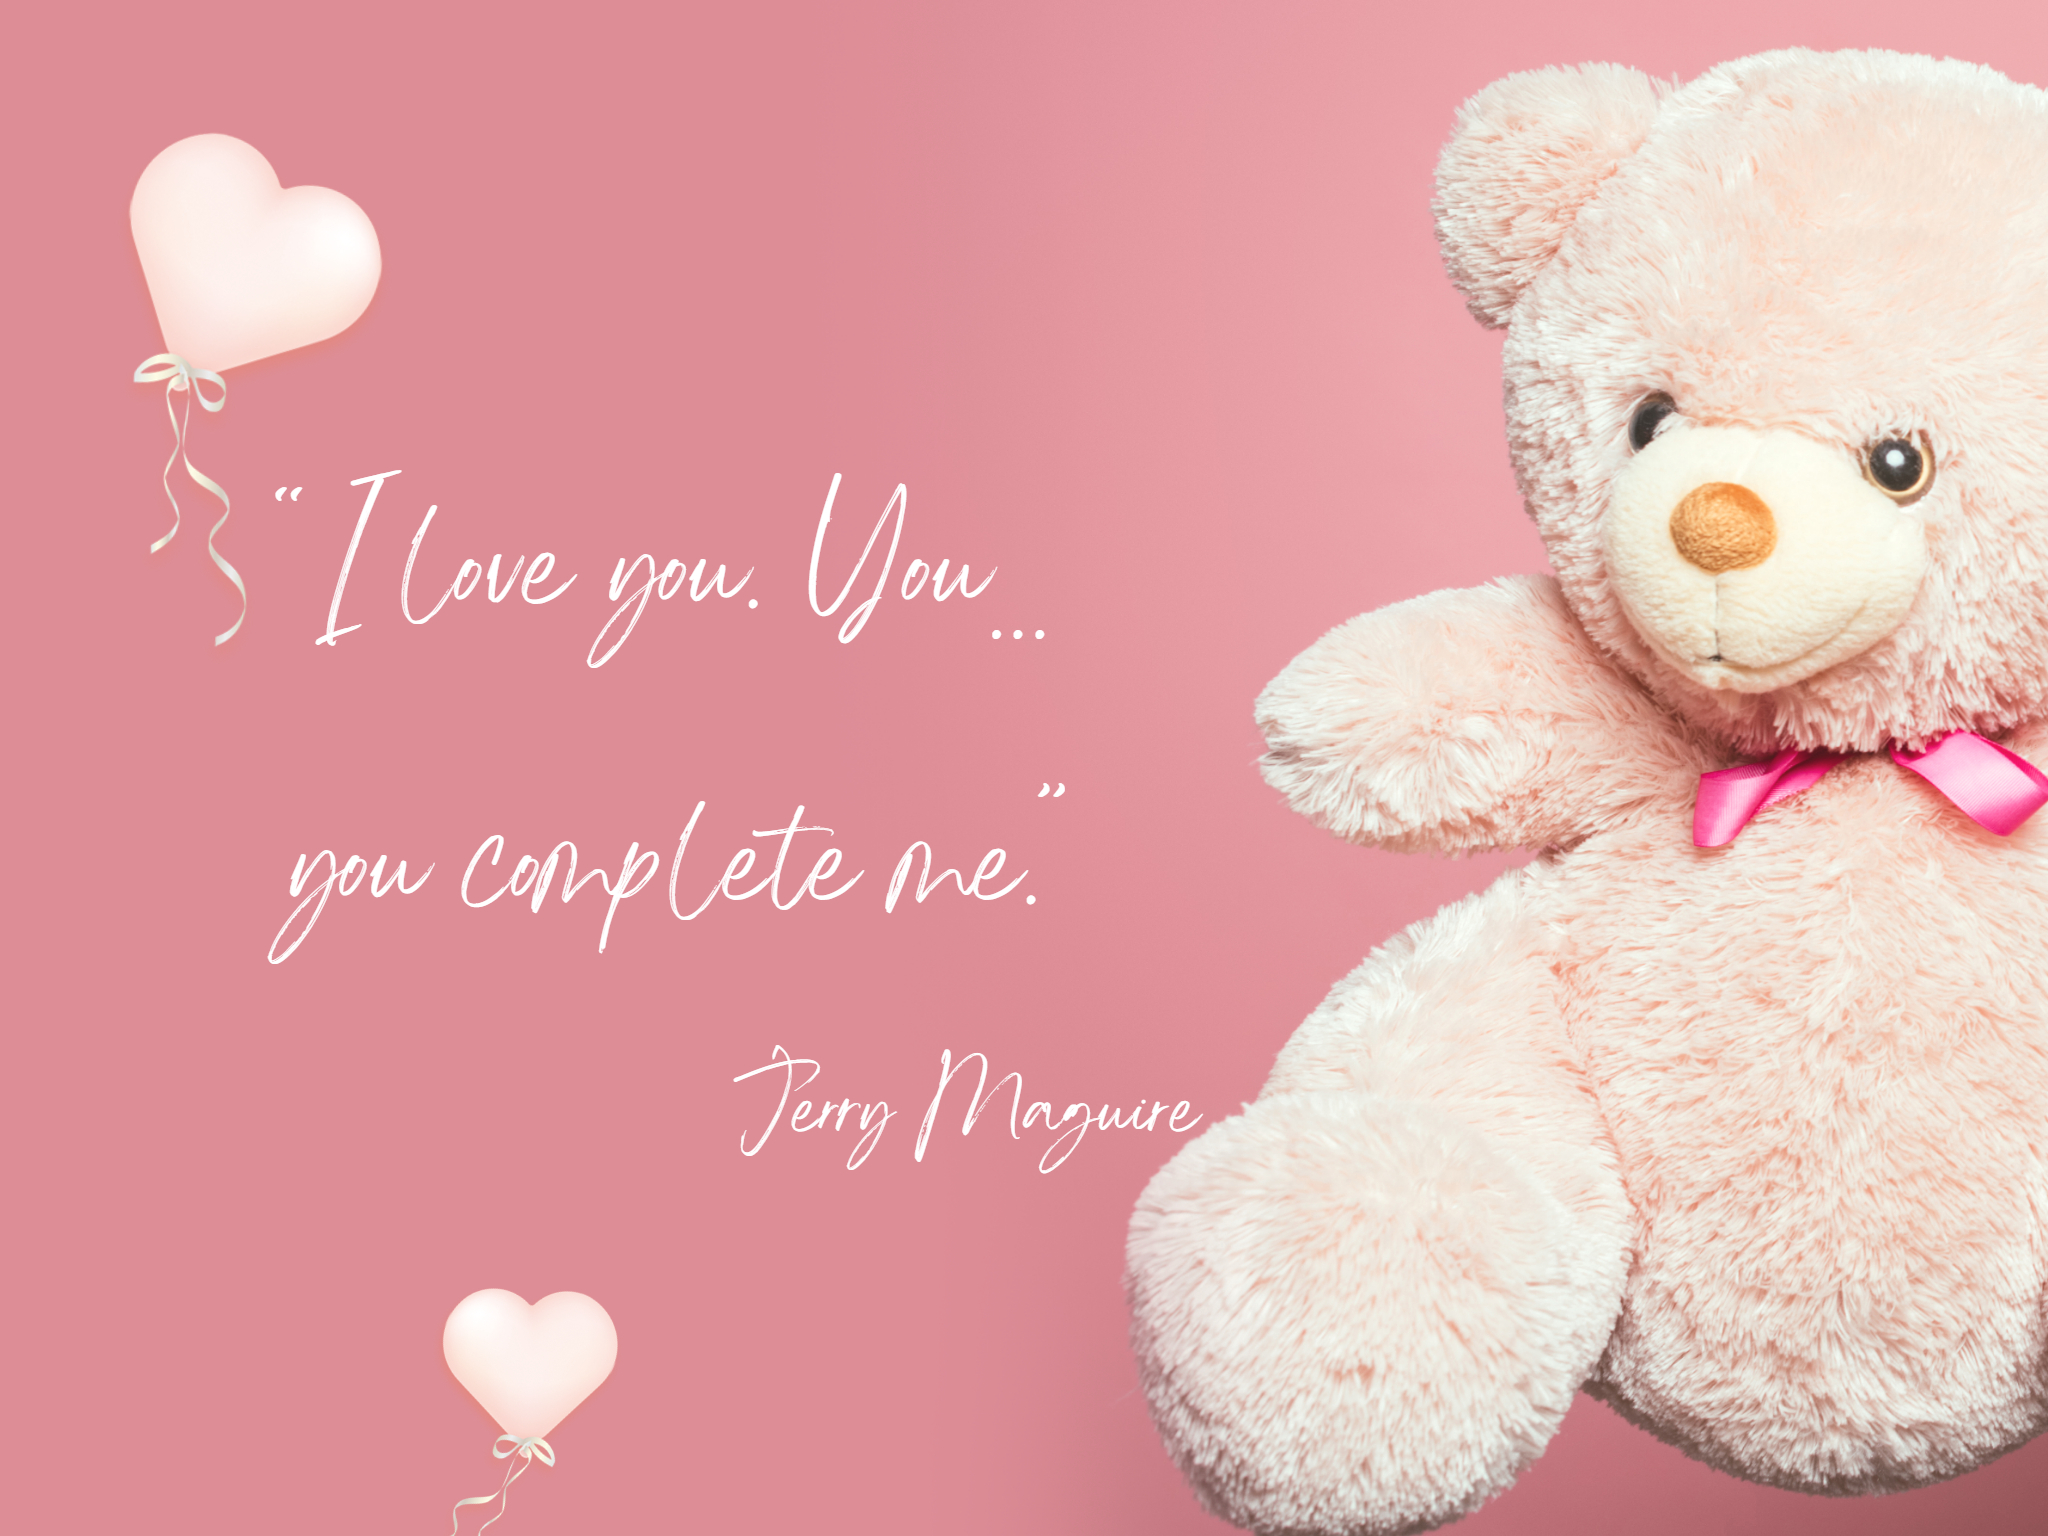 the romantic quote from Jerry Maguire on the pink love card with a bear toy